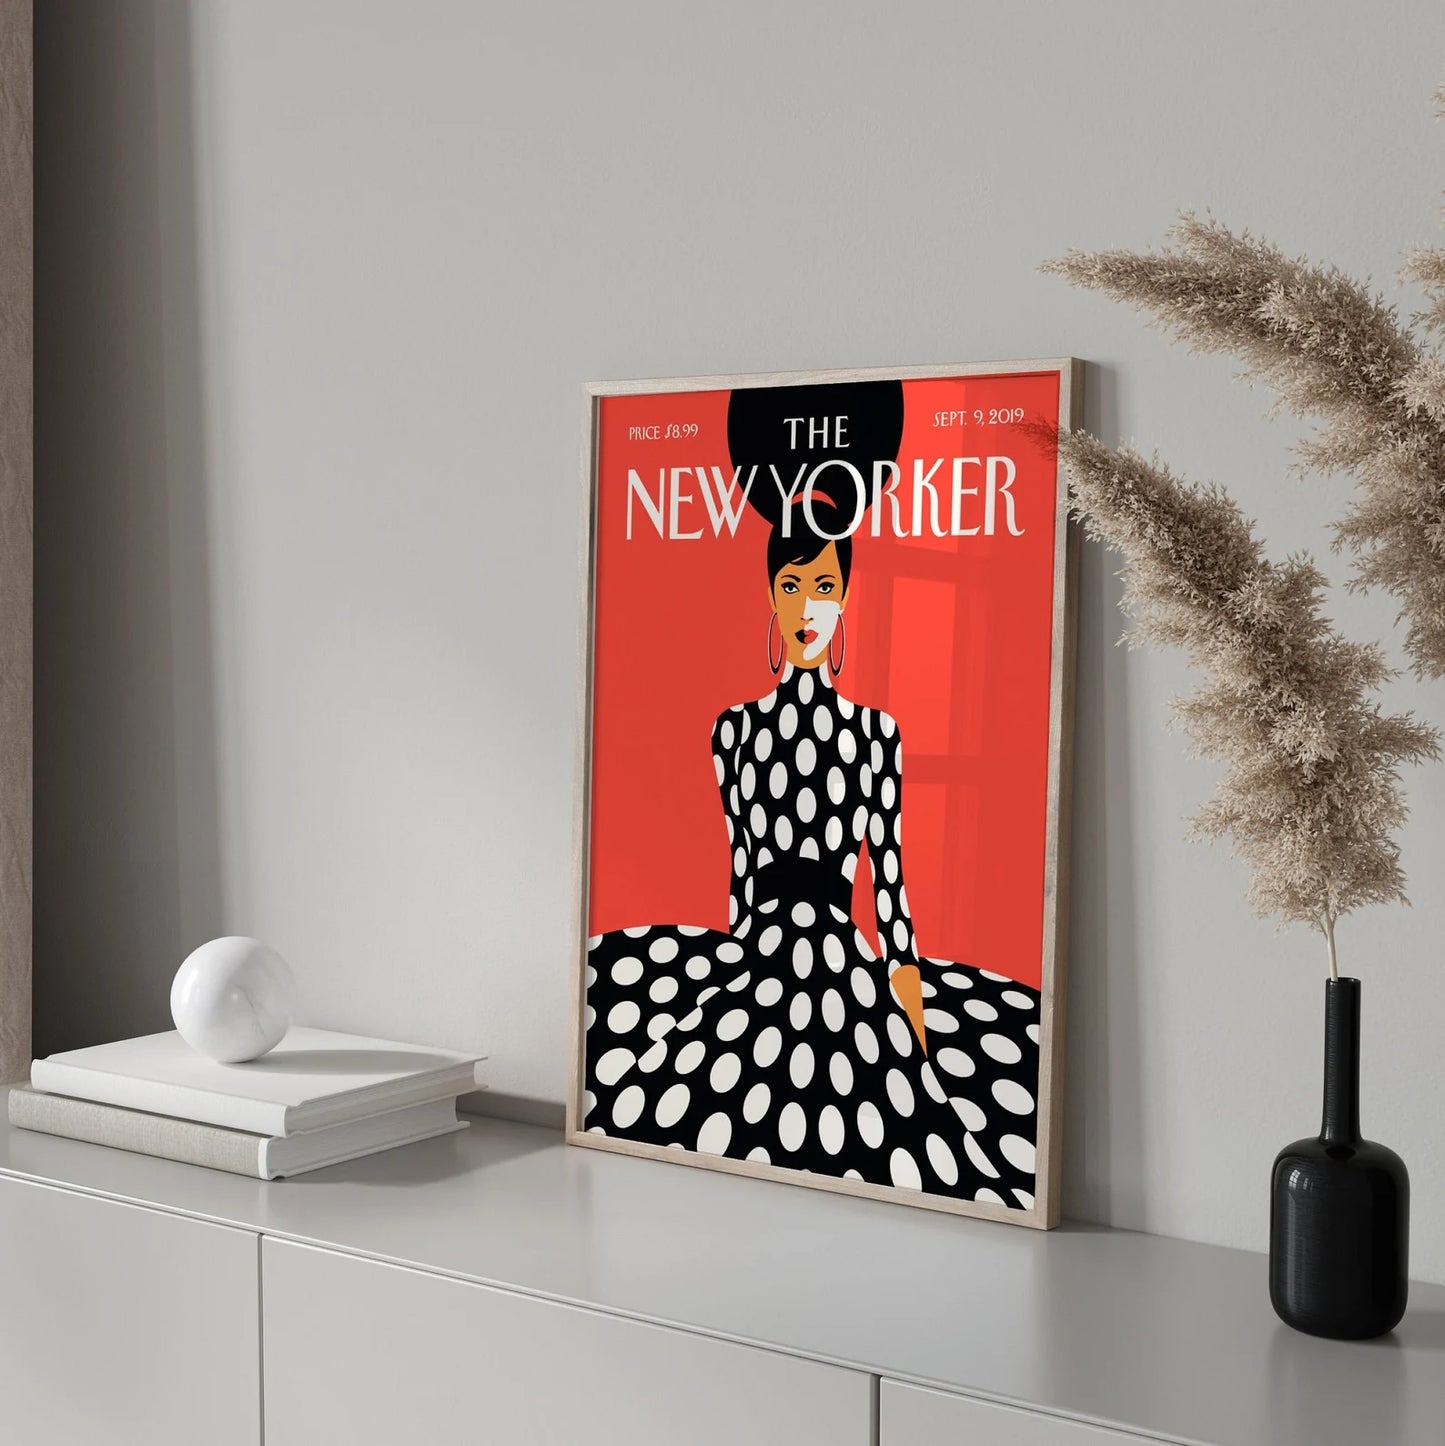 New Yorker Print, New Yorker Magazine Cover Poster, New Yorker Woman in Dress, Vintage Poster, Printable Wall Art, Trendy Home Decor Red Wall Art